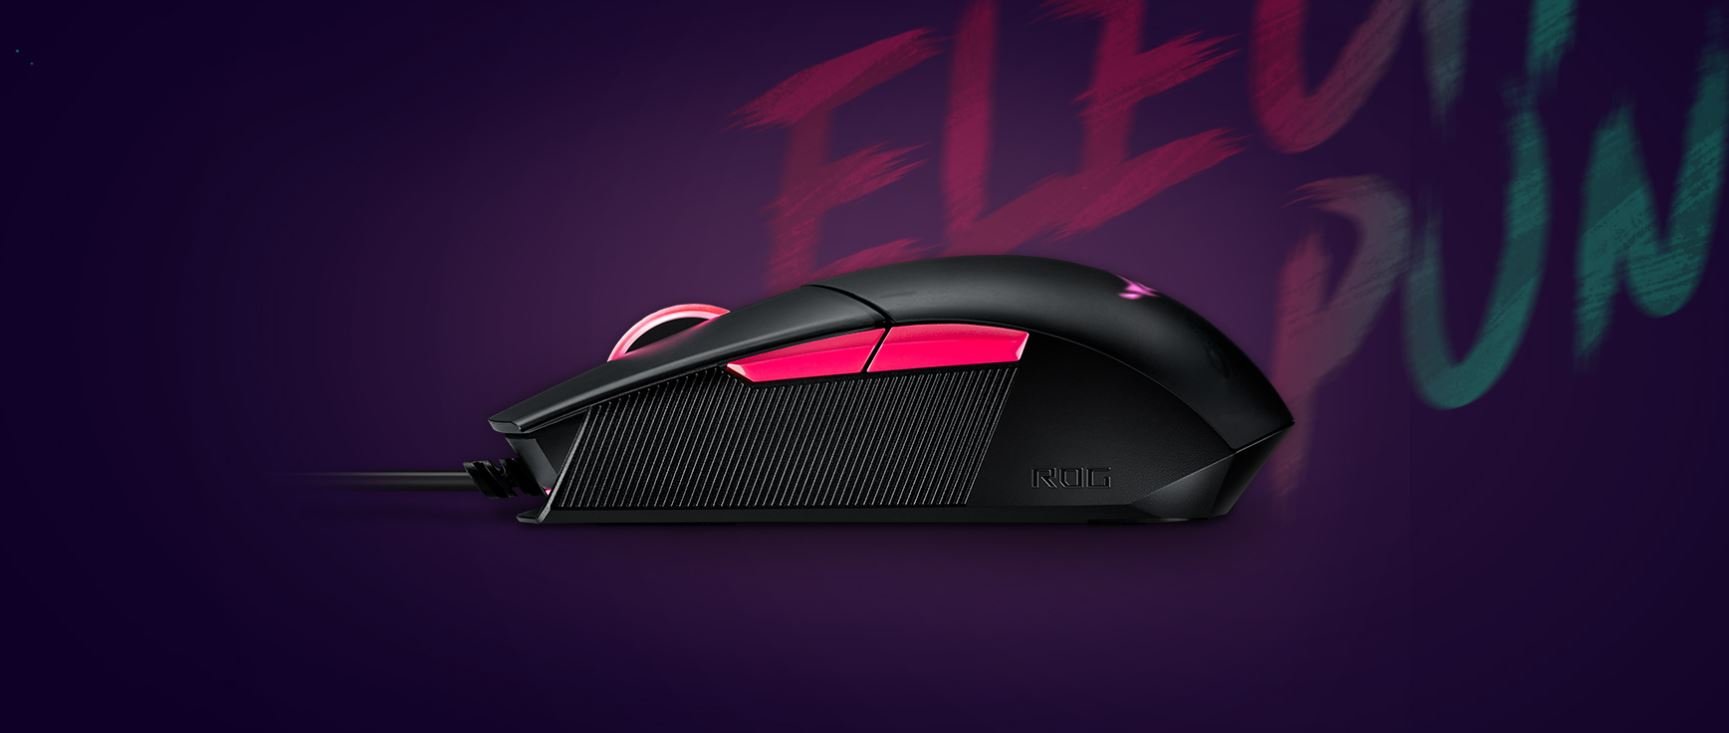 Asus_ROG_Strix_Impact_II_Wired_Ergonomic_Gaming_Mouse_sold_by_Technomobi